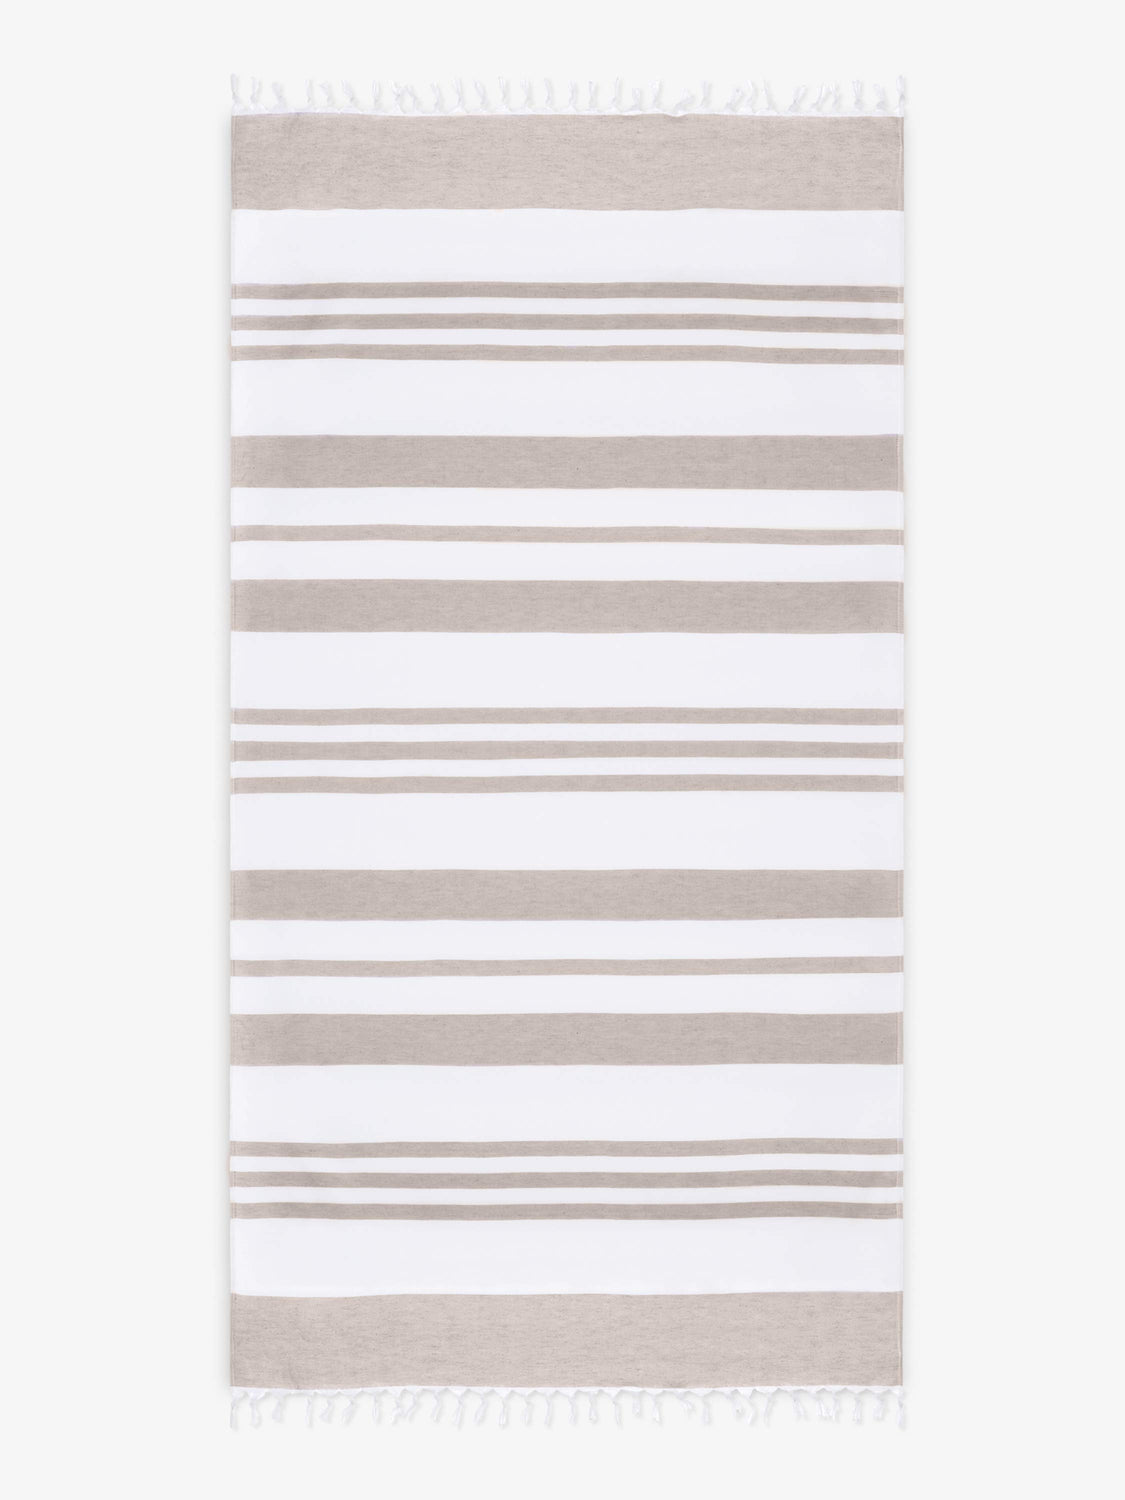 An oversized, tan and white striped Turkish cotton towel with white fringe laid out. 